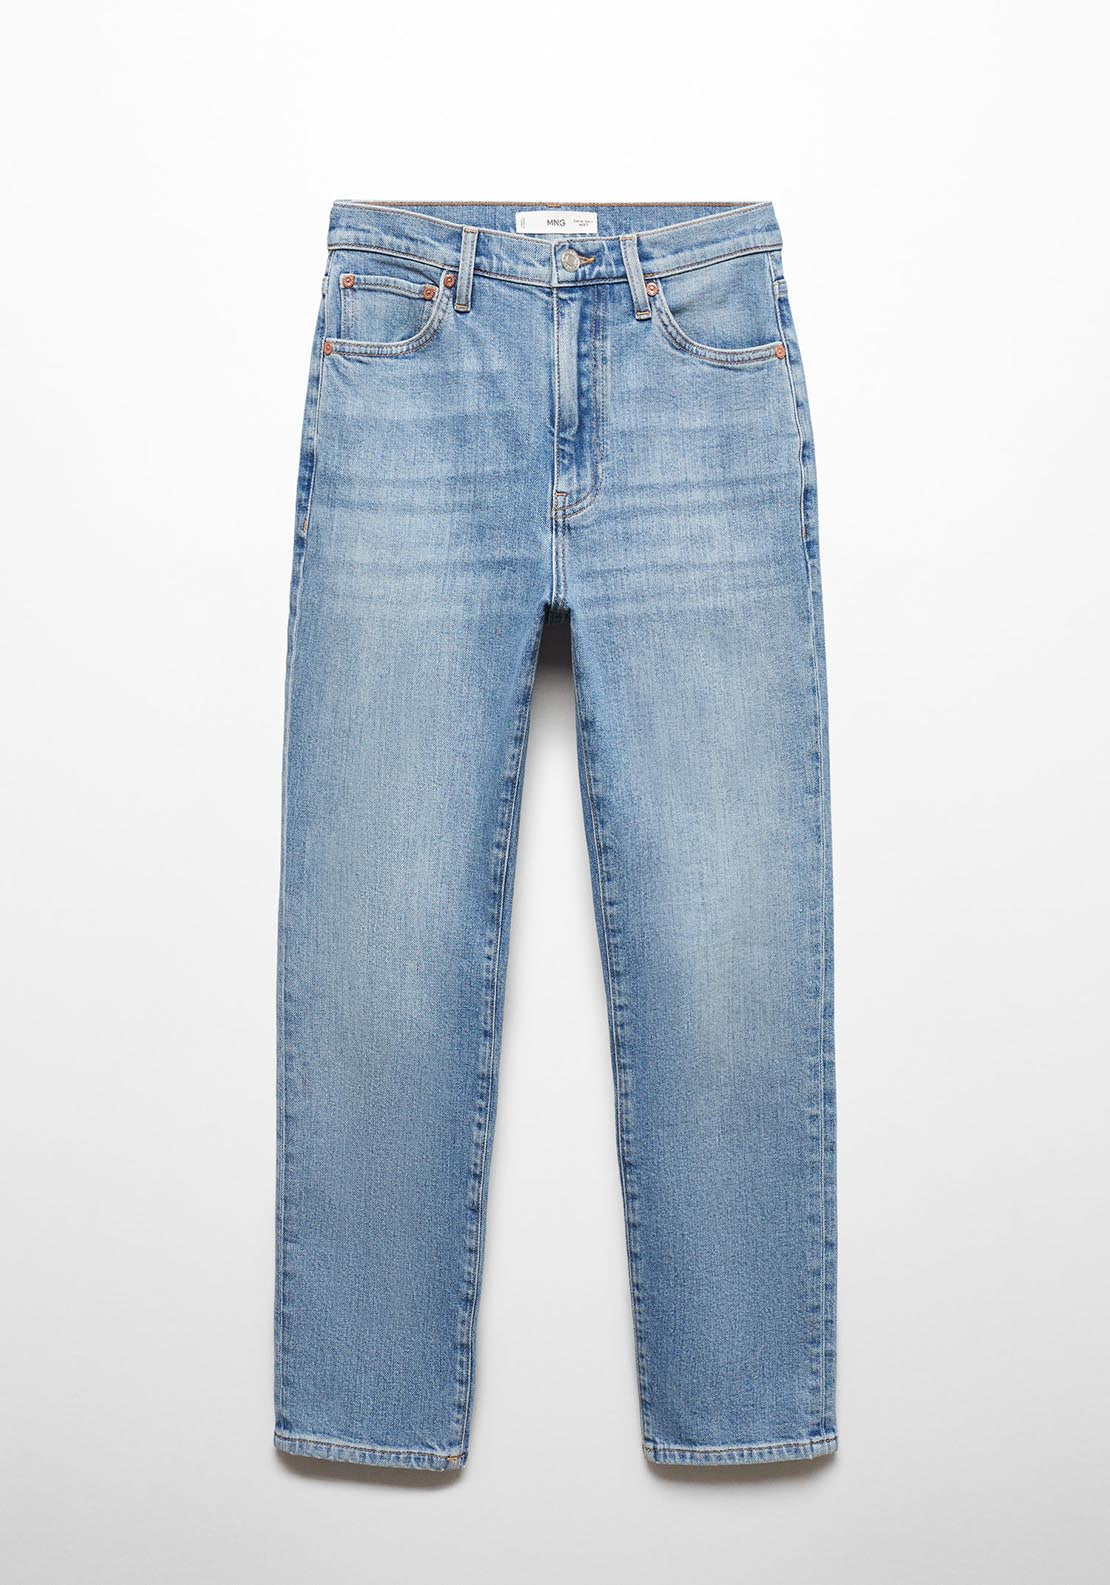 Mango Slim cropped jeans 2 Shaws Department Stores